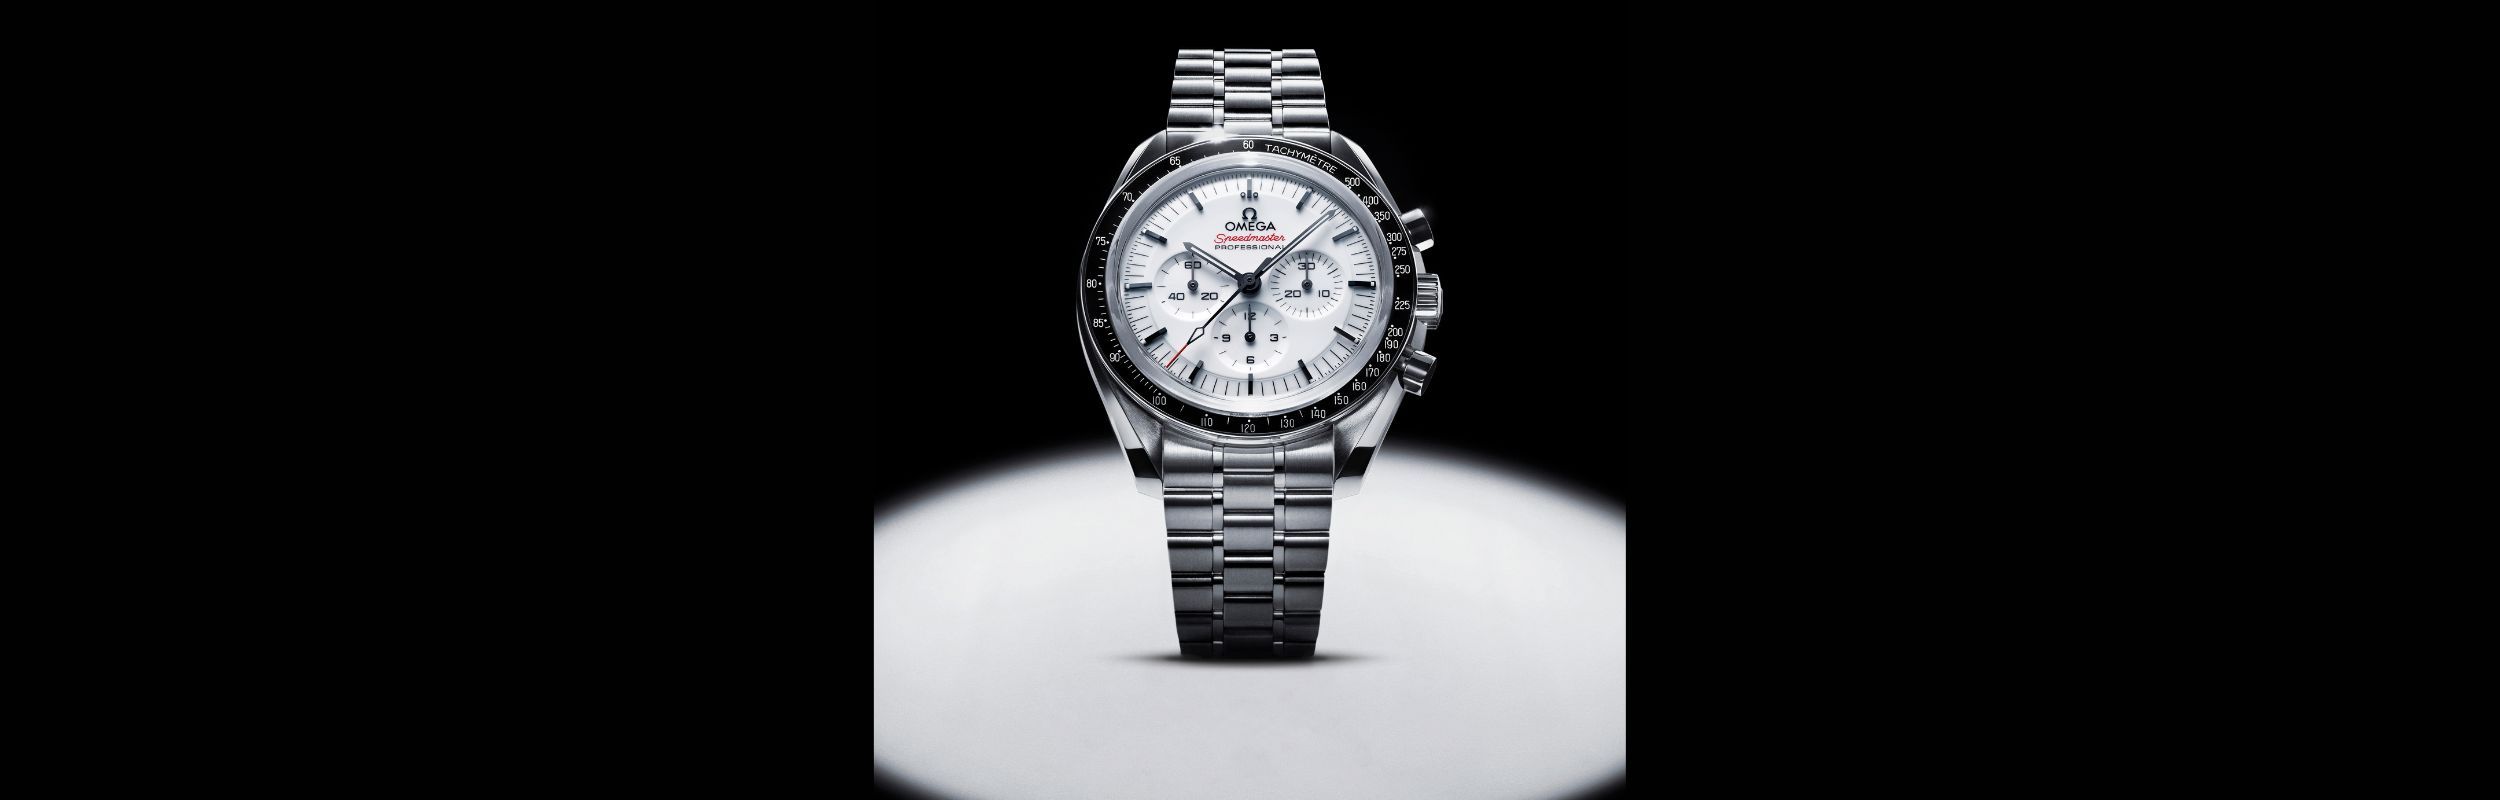 The Iconic OMEGA Speedmaster Moonwatch Gets a Stellar White Dial Edition